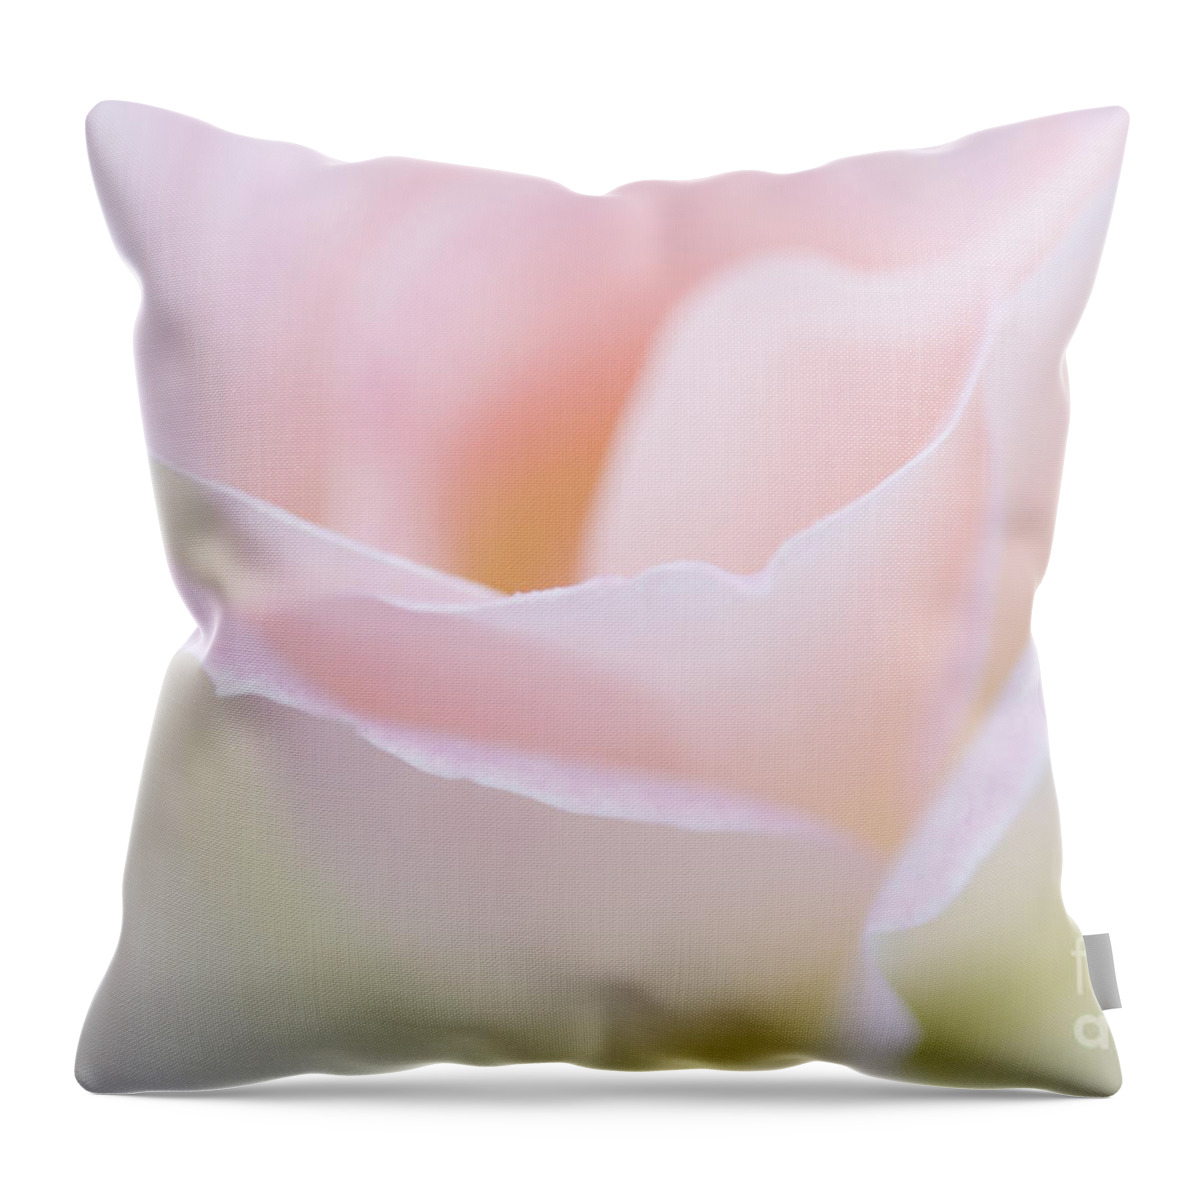 Rose Throw Pillow featuring the photograph Dreamy Rose by Patty Colabuono